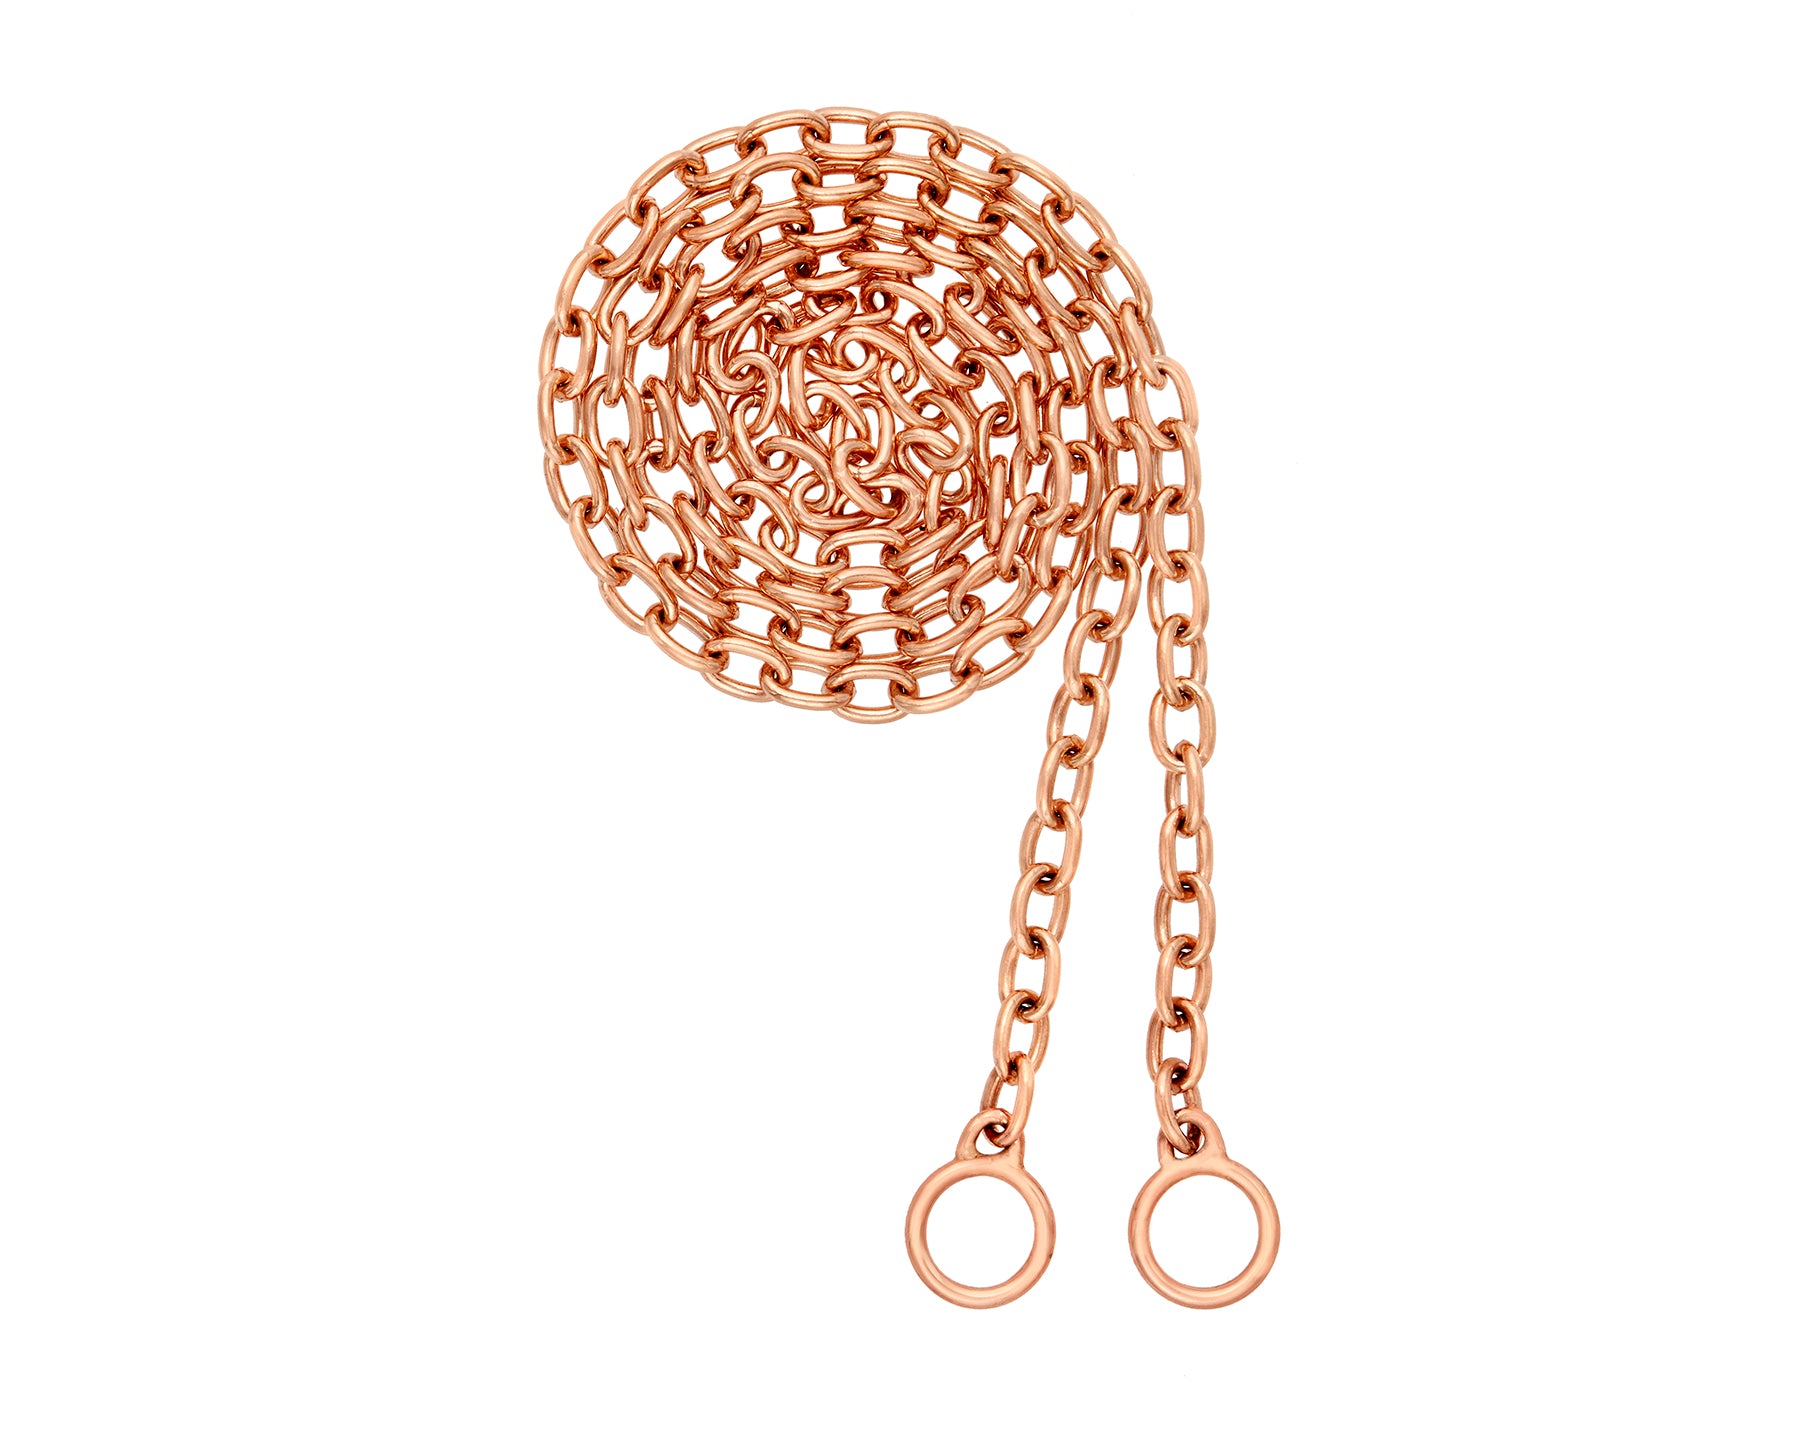 Curled up rose gold pulley chain